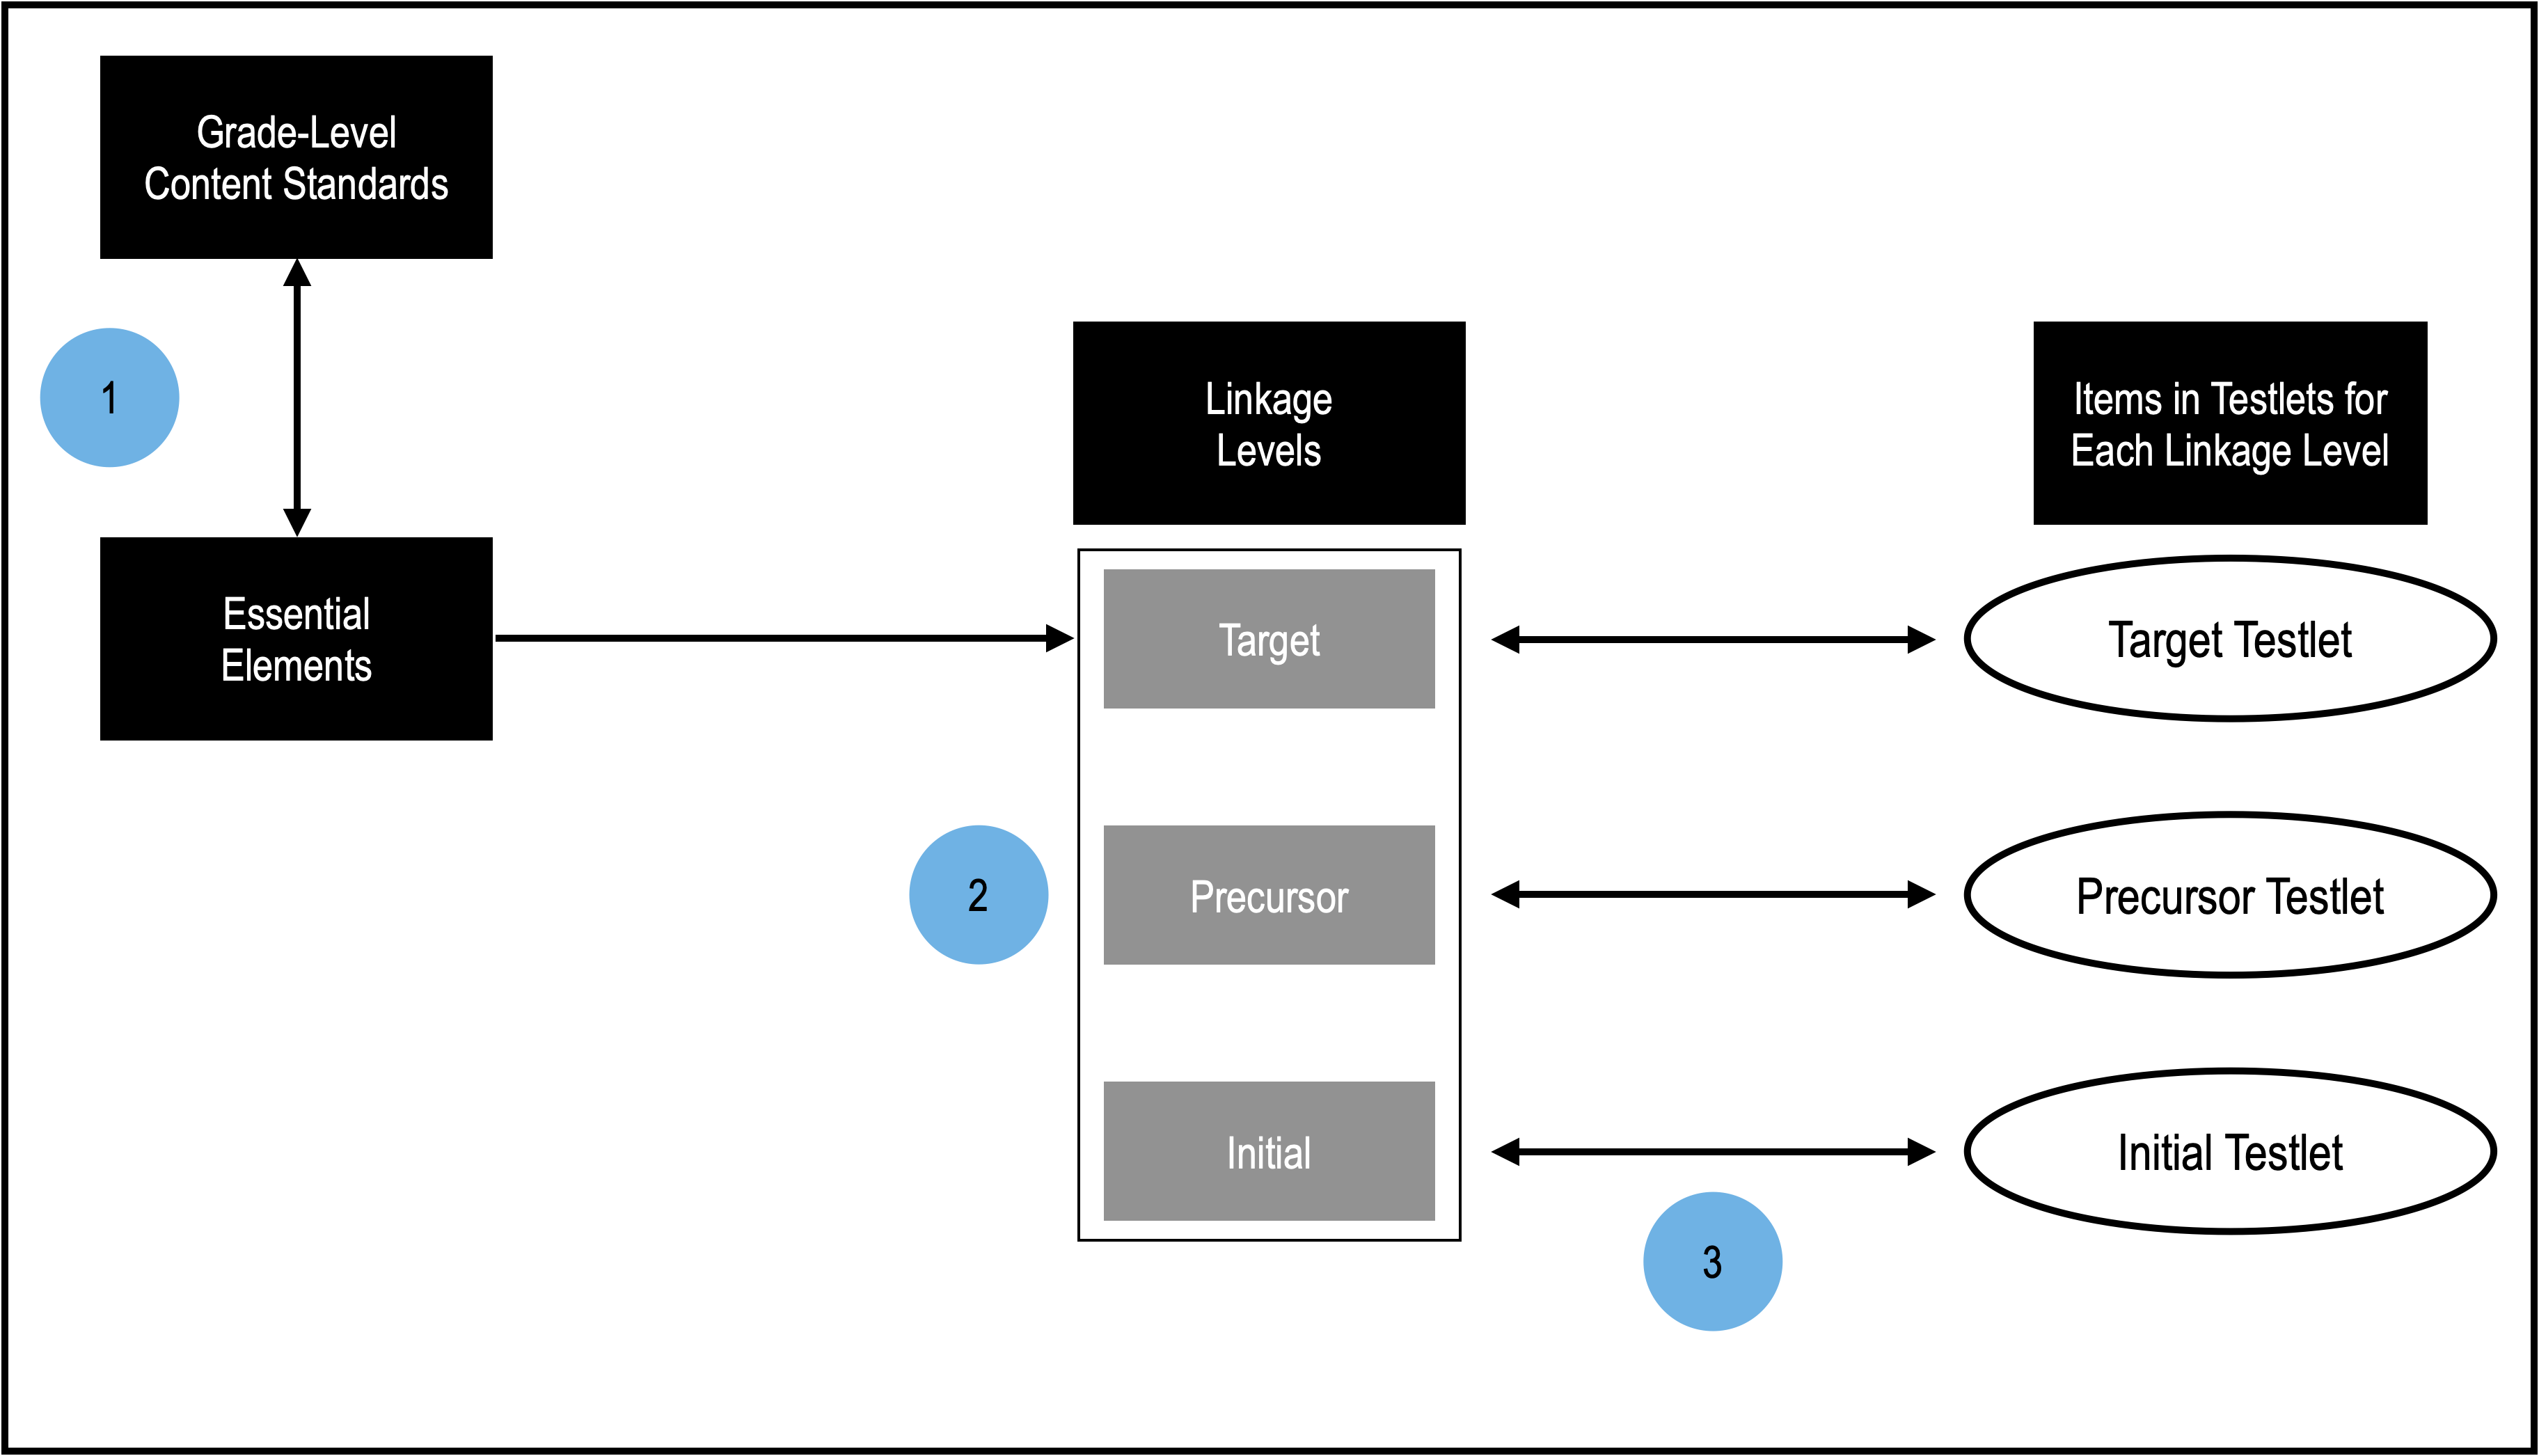 A flowchart showing that grade-level content standards are used to derive the Essential Elements. Essential Elements are are available at three linkage levels, which are measured by testlets.